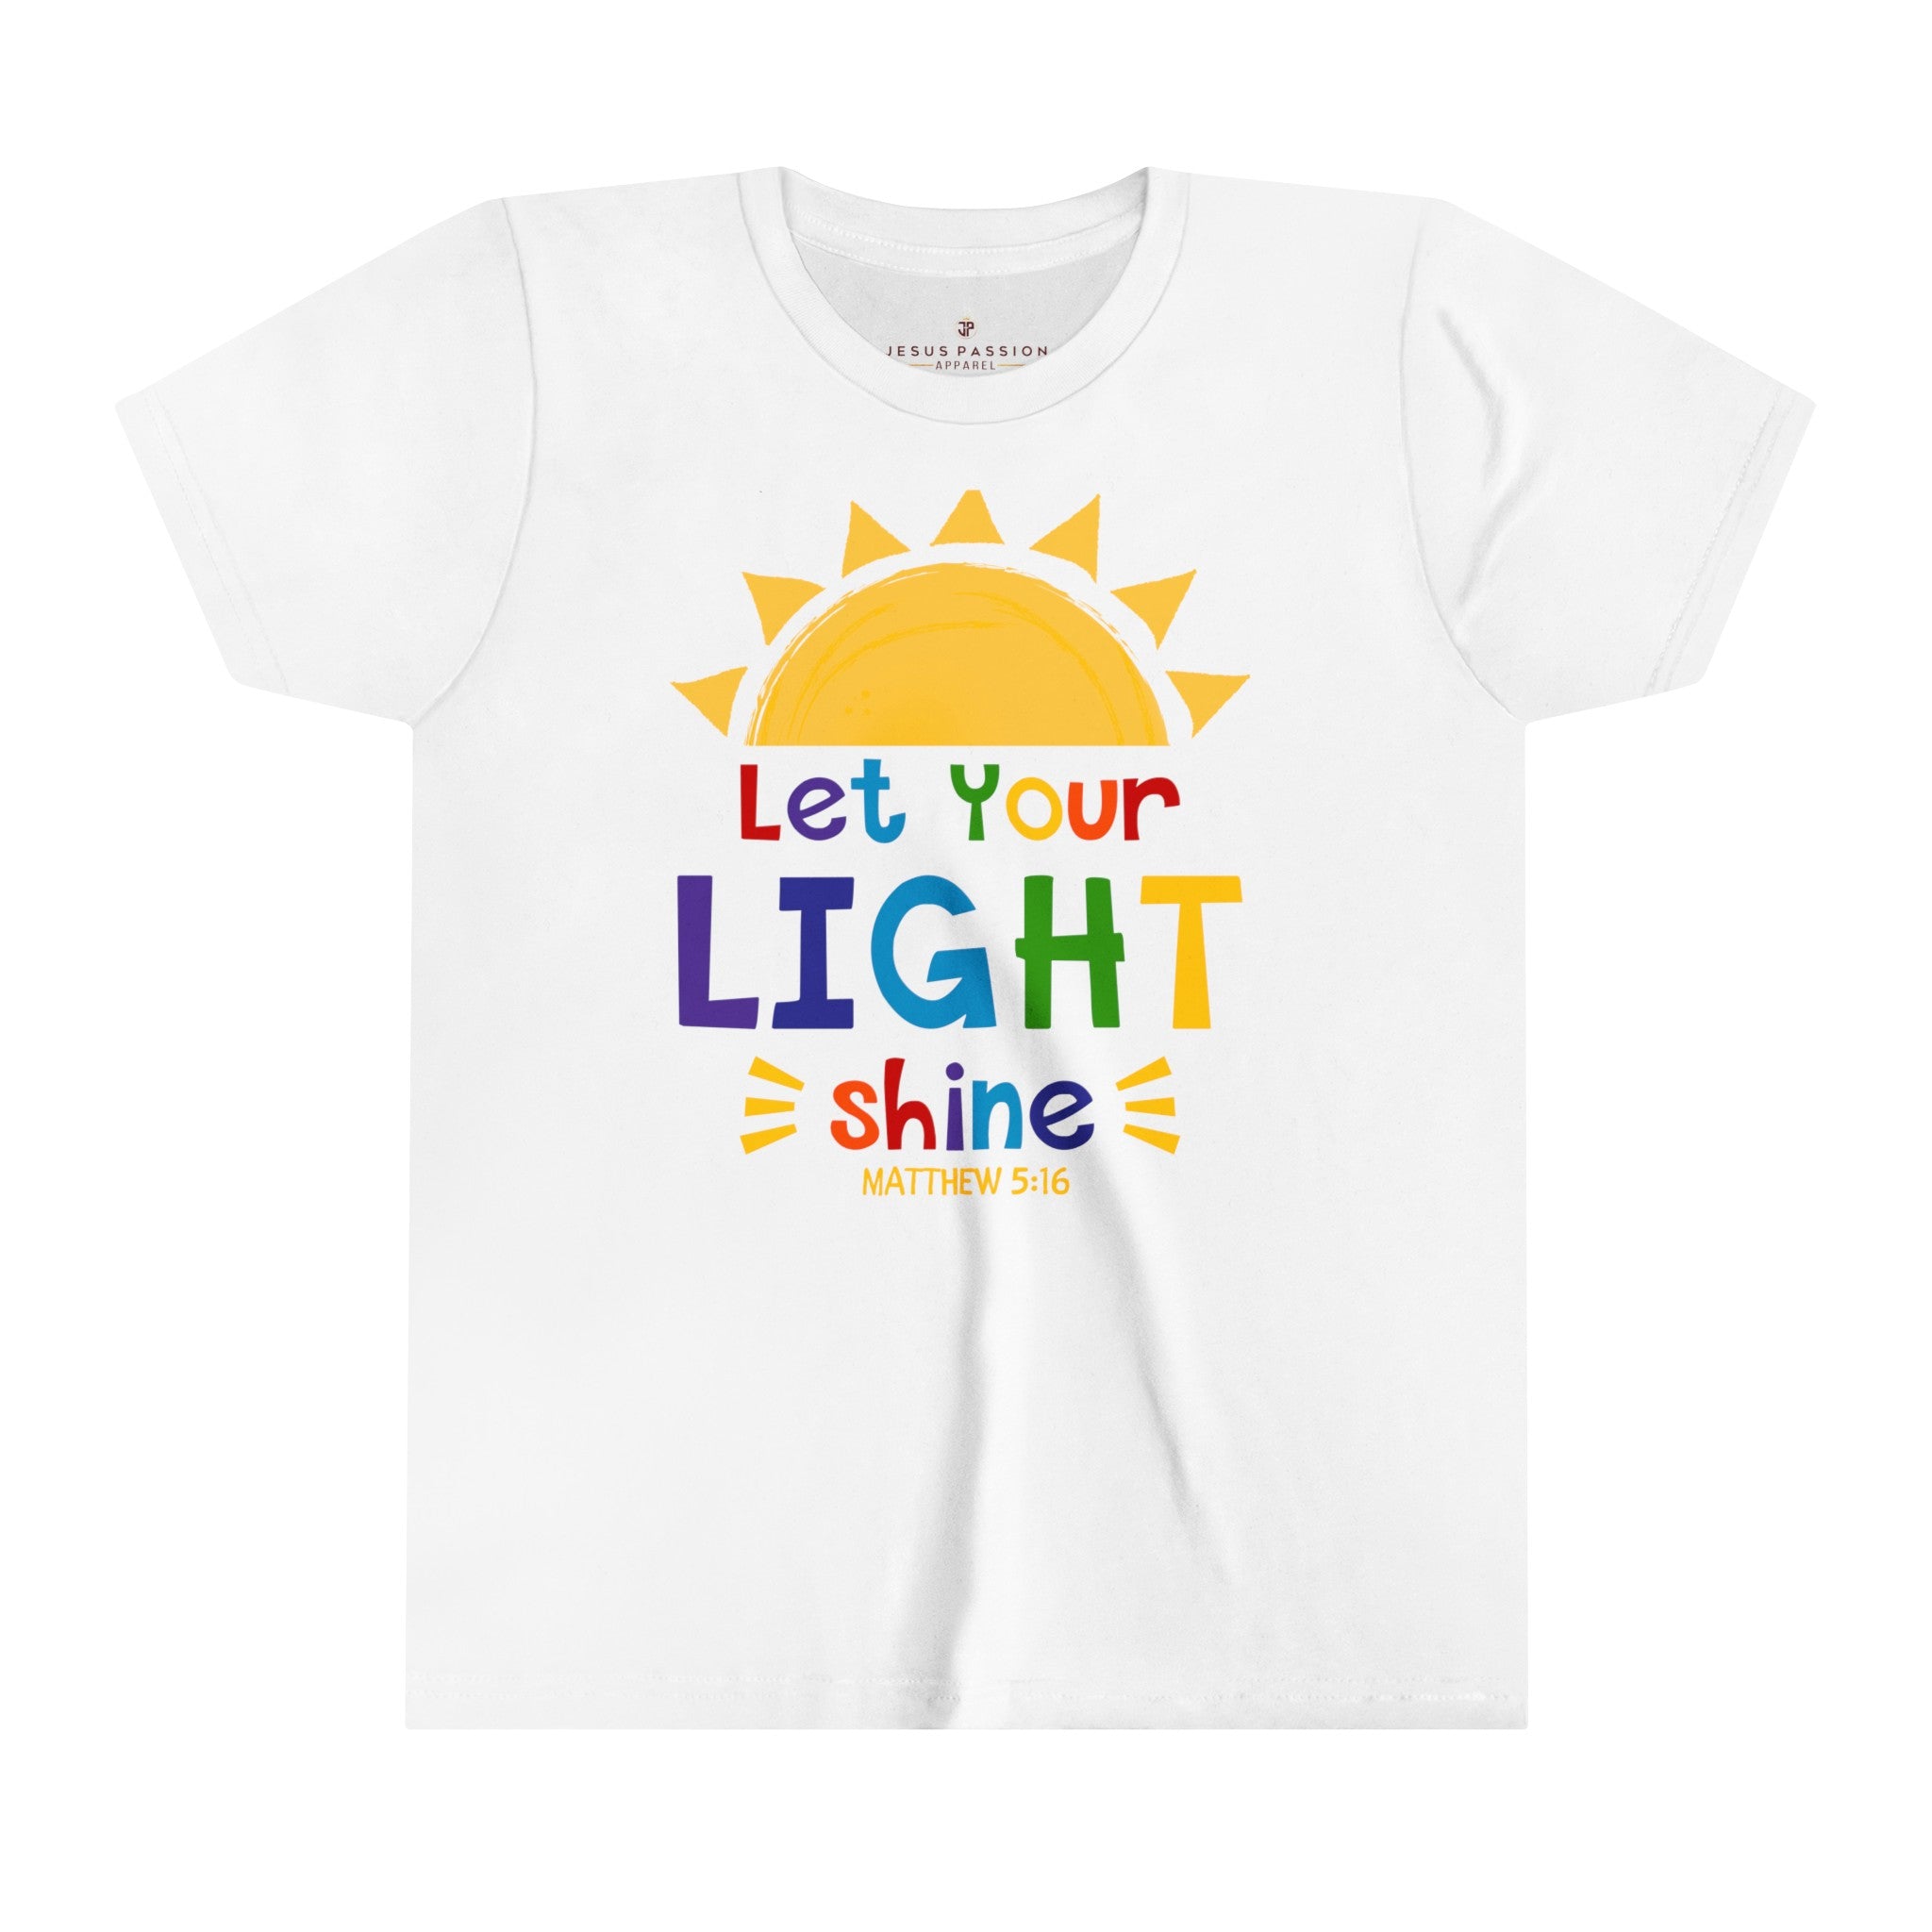 Let Your Light Shine Youth Relaxed Fit T-Shirt Colors: White Sizes: S Jesus Passion Apparel